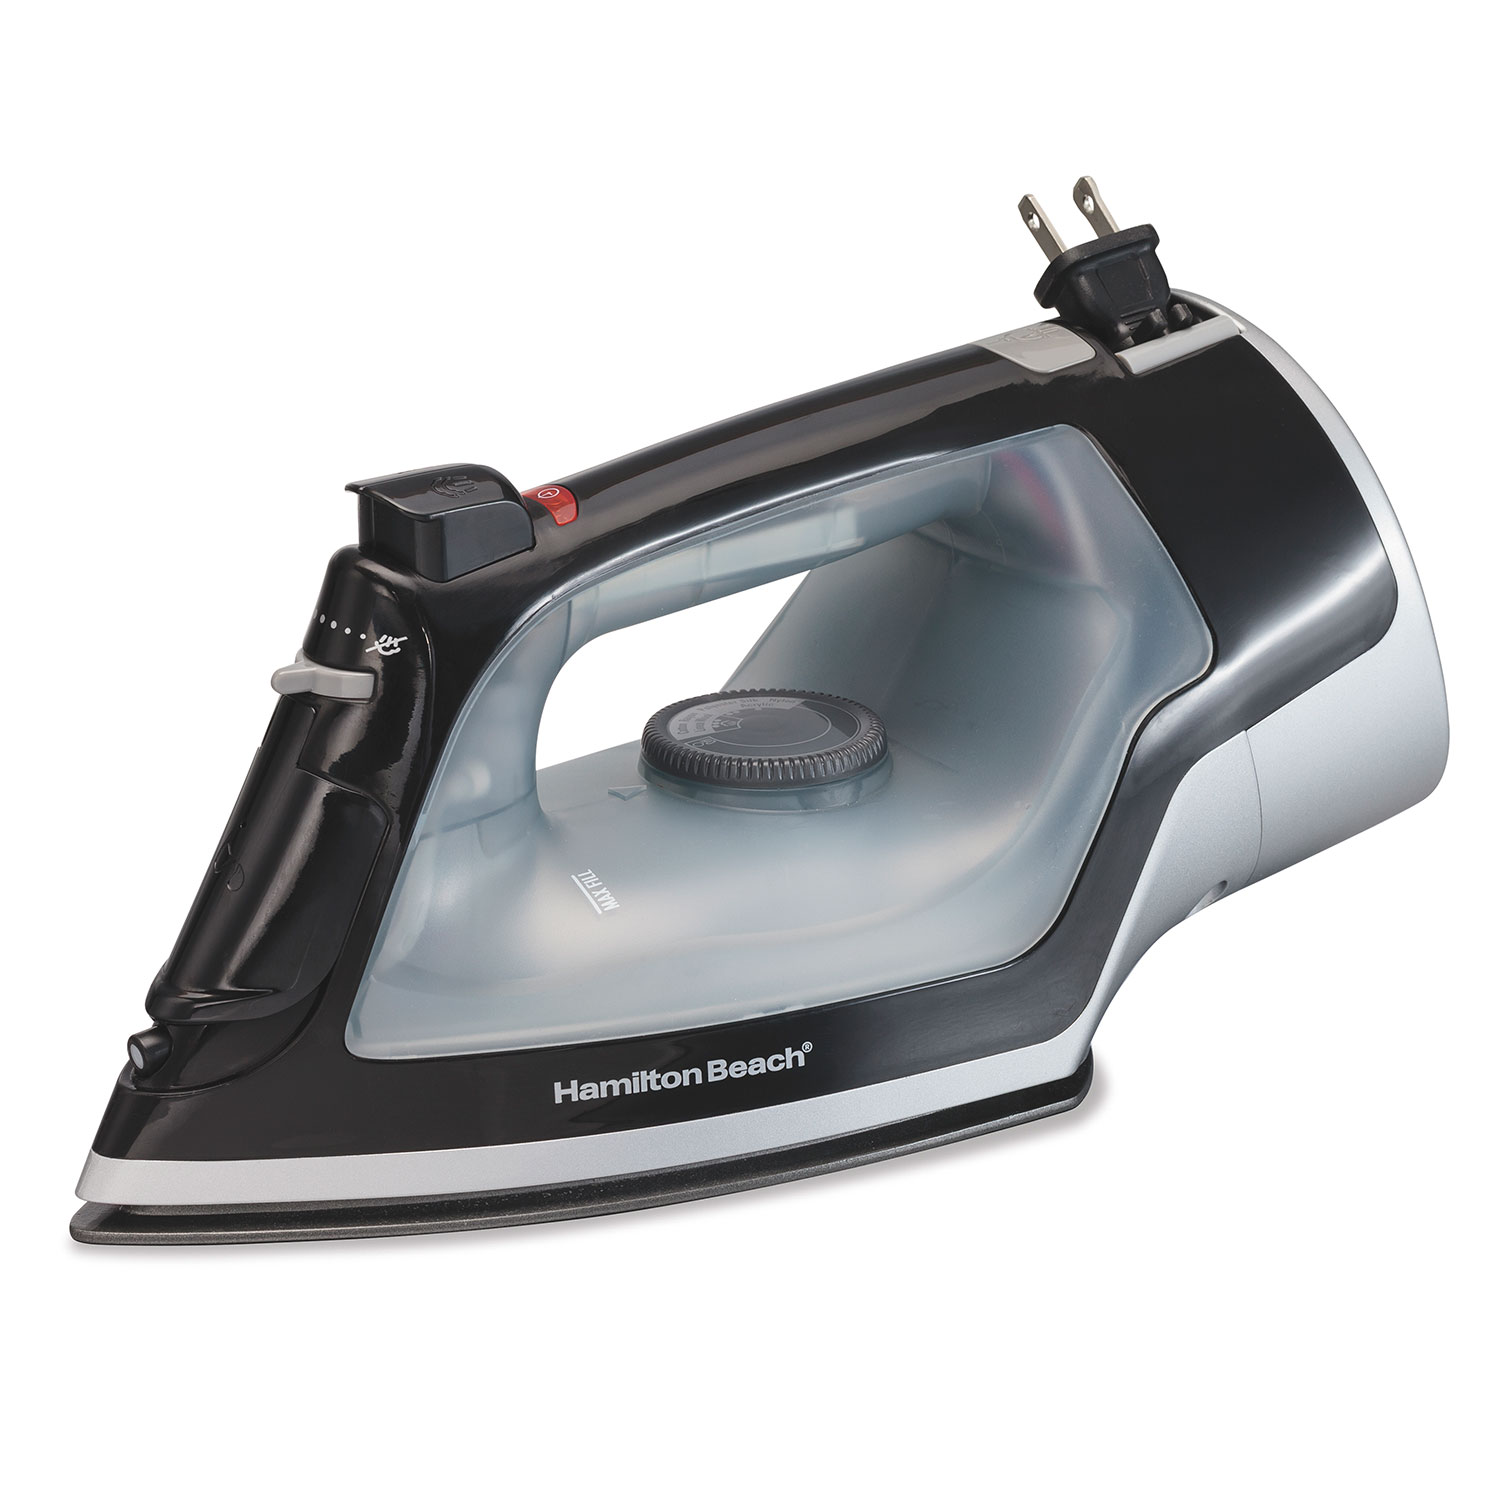 Recertified Full-Size Iron with Retractable Cord (R14289)